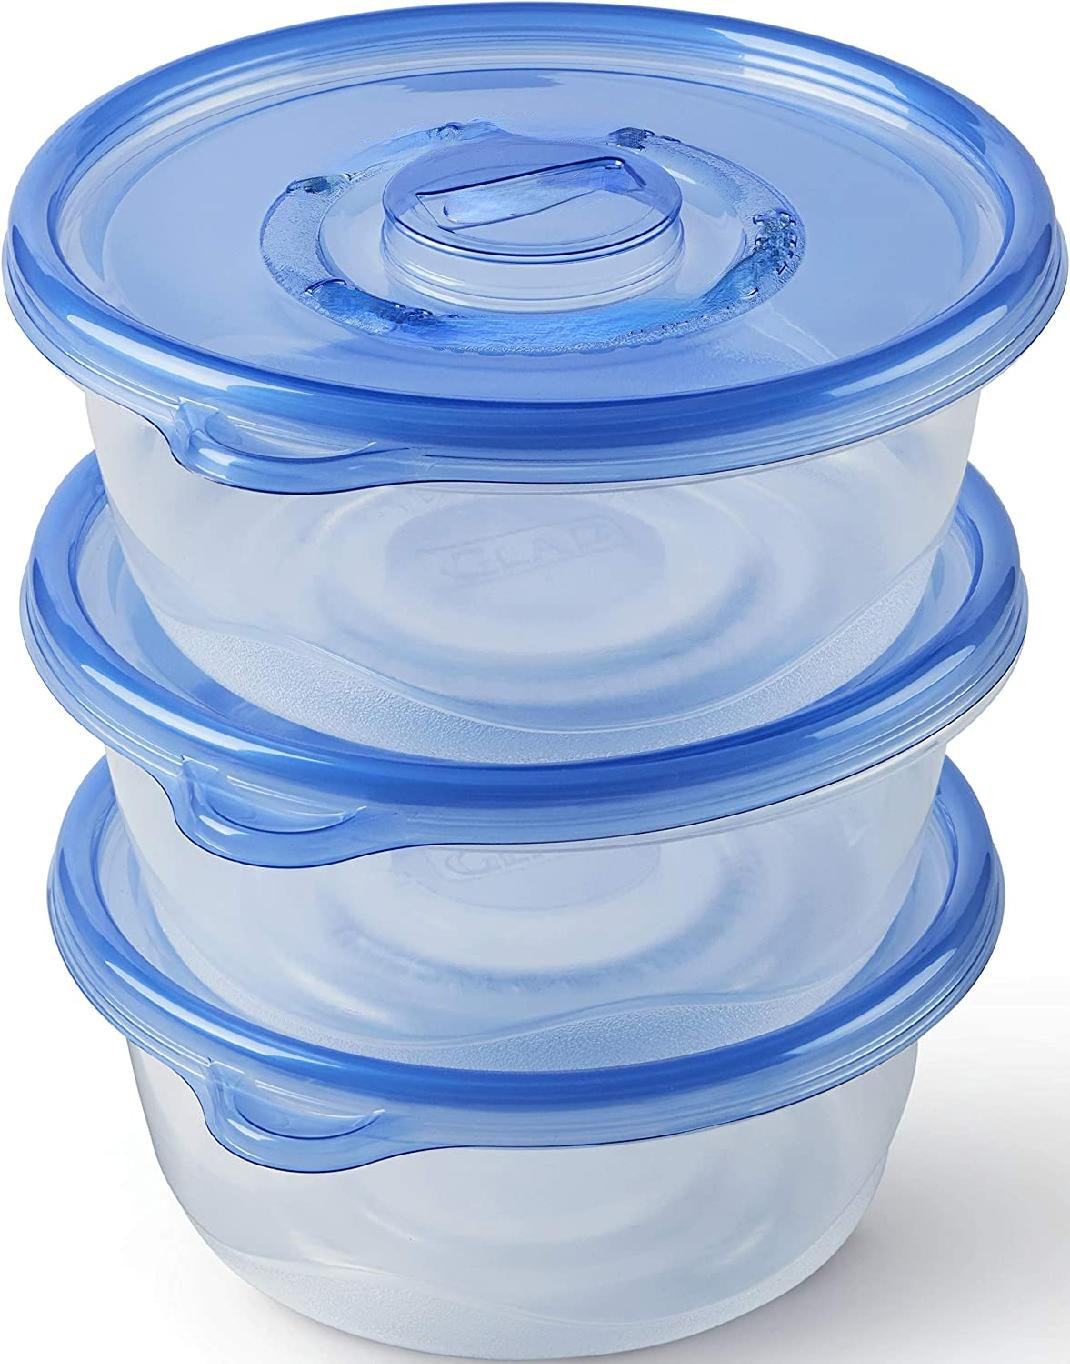 Food Storage Bowls With Lids 4 Pairs Blue 6 Stackable Set FREE